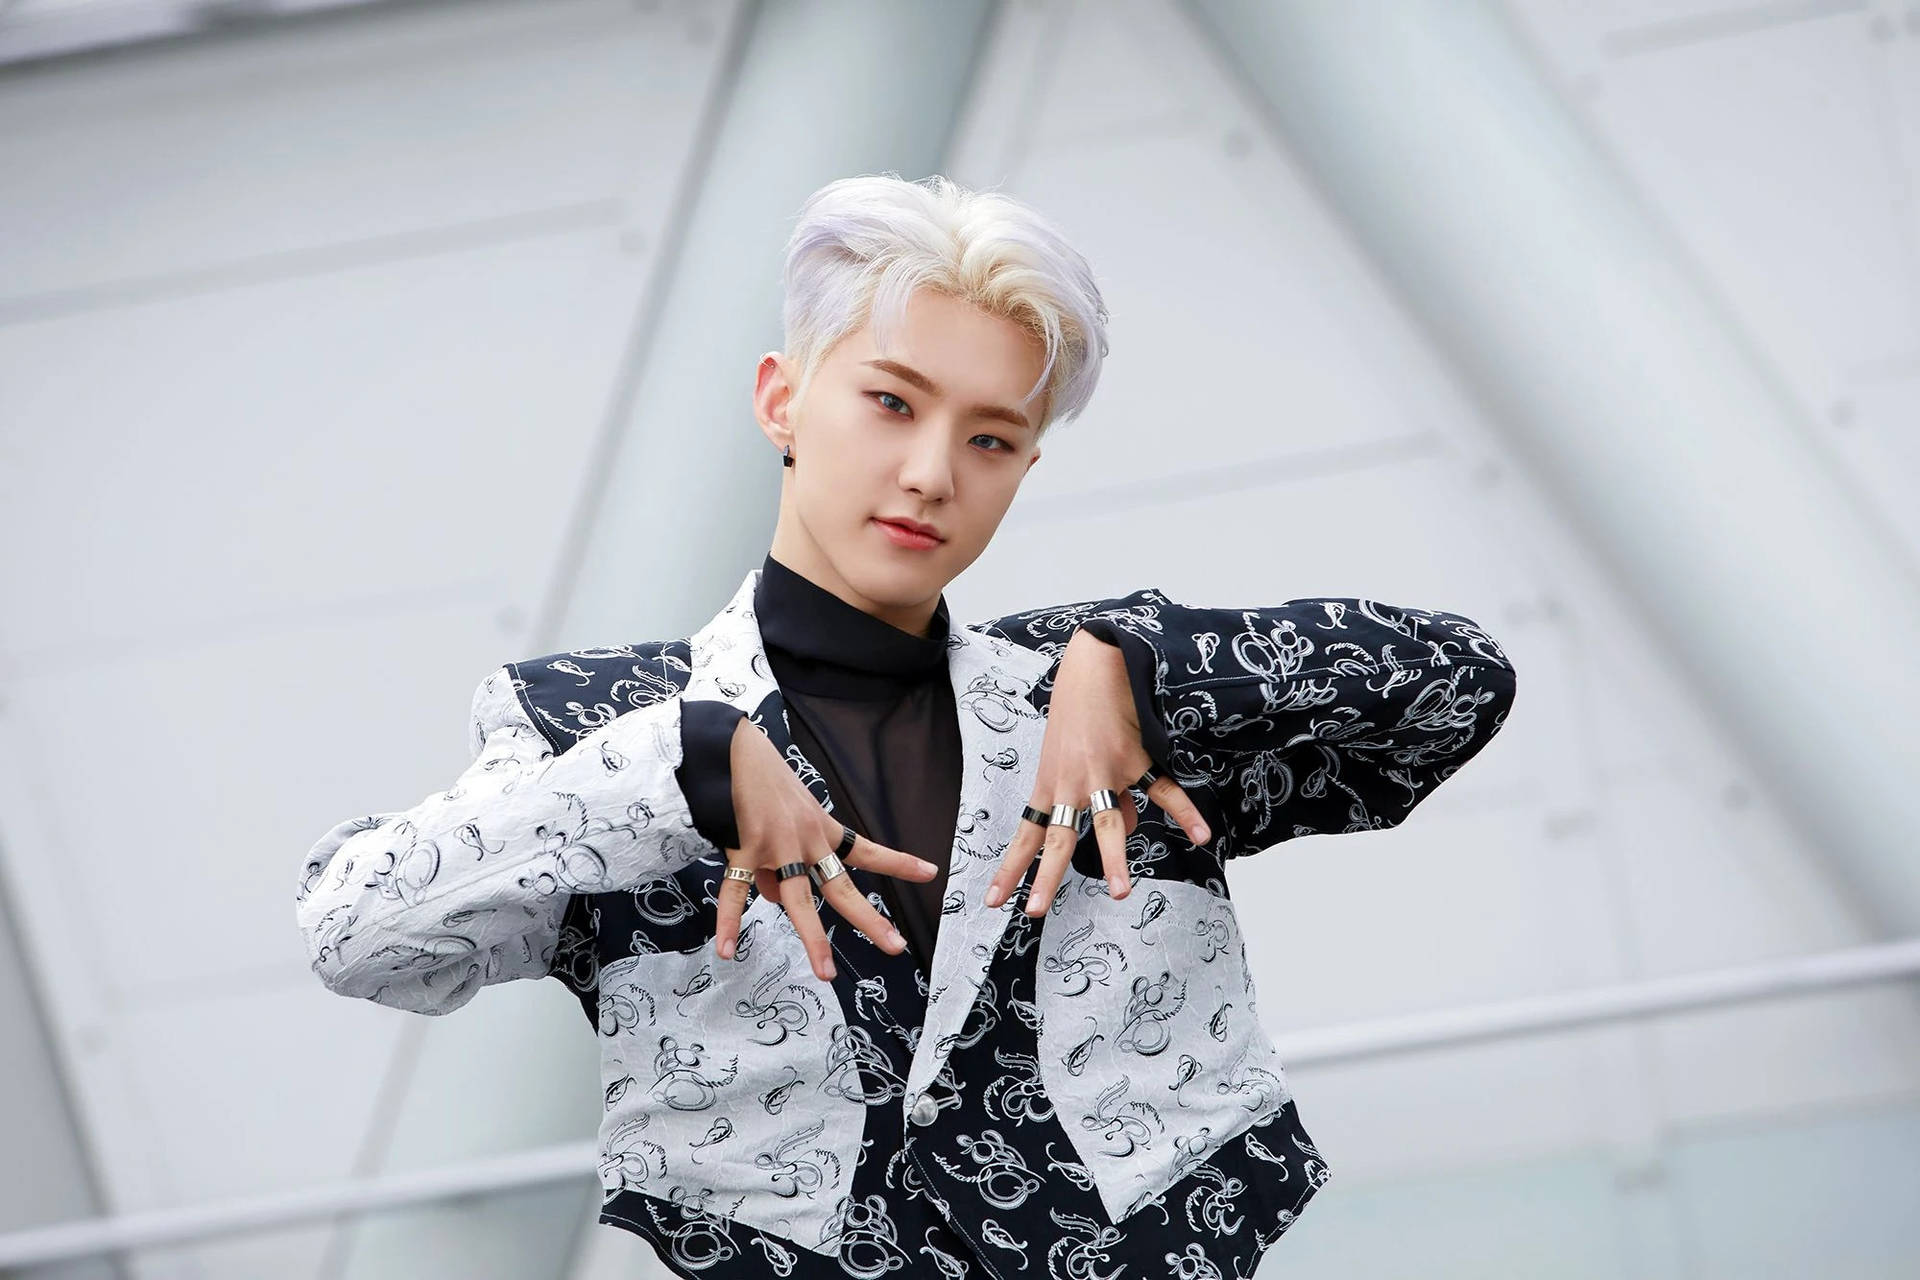 Hoshi With Stunning White Hair Background